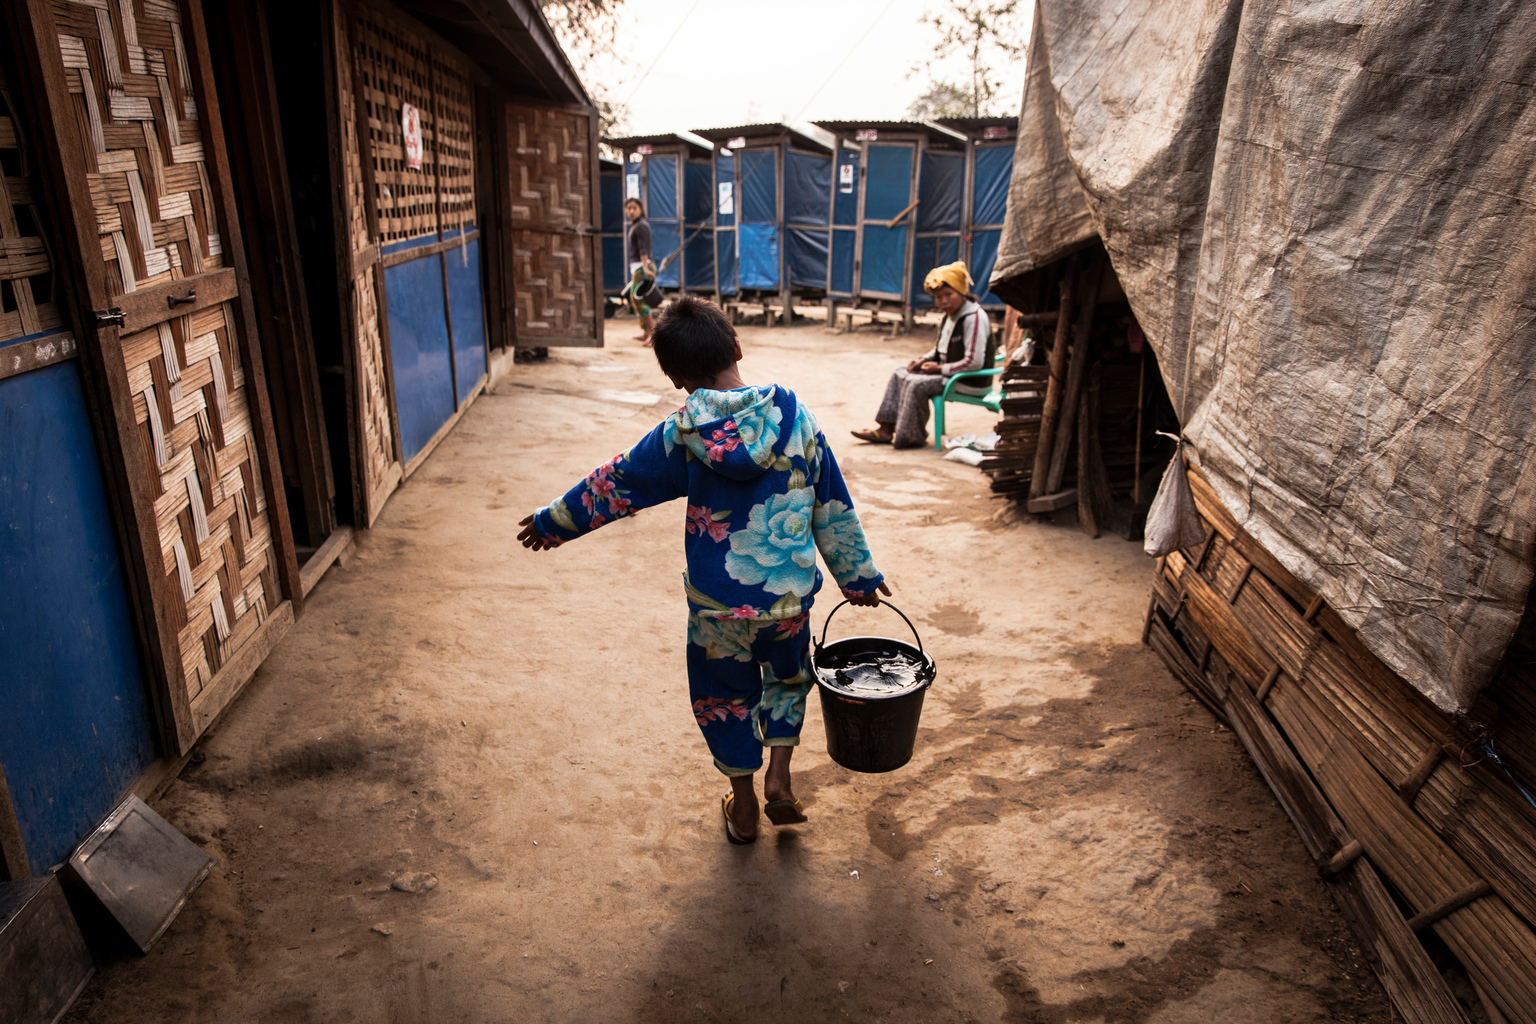 Aung Din, 12, displaced from Mung Ding Pa, collects water every morning for his household at the Phan Khar Kone IDP camp in Bhamo city, Kachin State, Myanmar, Wednesday 29 March 2017. Aung Din lives with his grandmother, mother and sister in the camp - his father was killed in a blast, most likely from a landmine while herding cattle, when fighting erupted between Kachin Independence Army (KIA) and the Myanmar Army in 2013. In 2017, working with the Government of Myanmar, UNICEF will strive to meet the basic needs of the most vulnerable internally displaced children. Myanmar is experiencing three protracted humanitarian crises, each with its own set of complex underlying factors. In Rakhine State, inter-communal violence that erupted in 2012 continues to plague 120,000 internally displaced people spread across 40 camps or informal sites, as well as host communities. Eighty per cent of the displaced are women and children. In Kachin State, armed conflict that reignited in 2011 continues to impact communities caught in the crossfire between an ethnic armed group and the Myanmar army. Nearly 87,000 people remain displaced as a result, including 40 per cent who are in areas outside of government control. An additional 11,000 people remain displaced in northern Shan State, where a similar conflict oke out in 2011. Compounding the protracted crises are issues related to religious and/or ethnic discrimination, exploitation, chronic poverty, vulnerability to natural disasters, statelessness, trafficking and humanitarian access. In addition to the humanitarian crises in Rakhine, Kachin and Shan states, Myanmar is impacted by humanitarian situations in other parts of the country, including natural disasters, health emergencies and small-scale displacements.